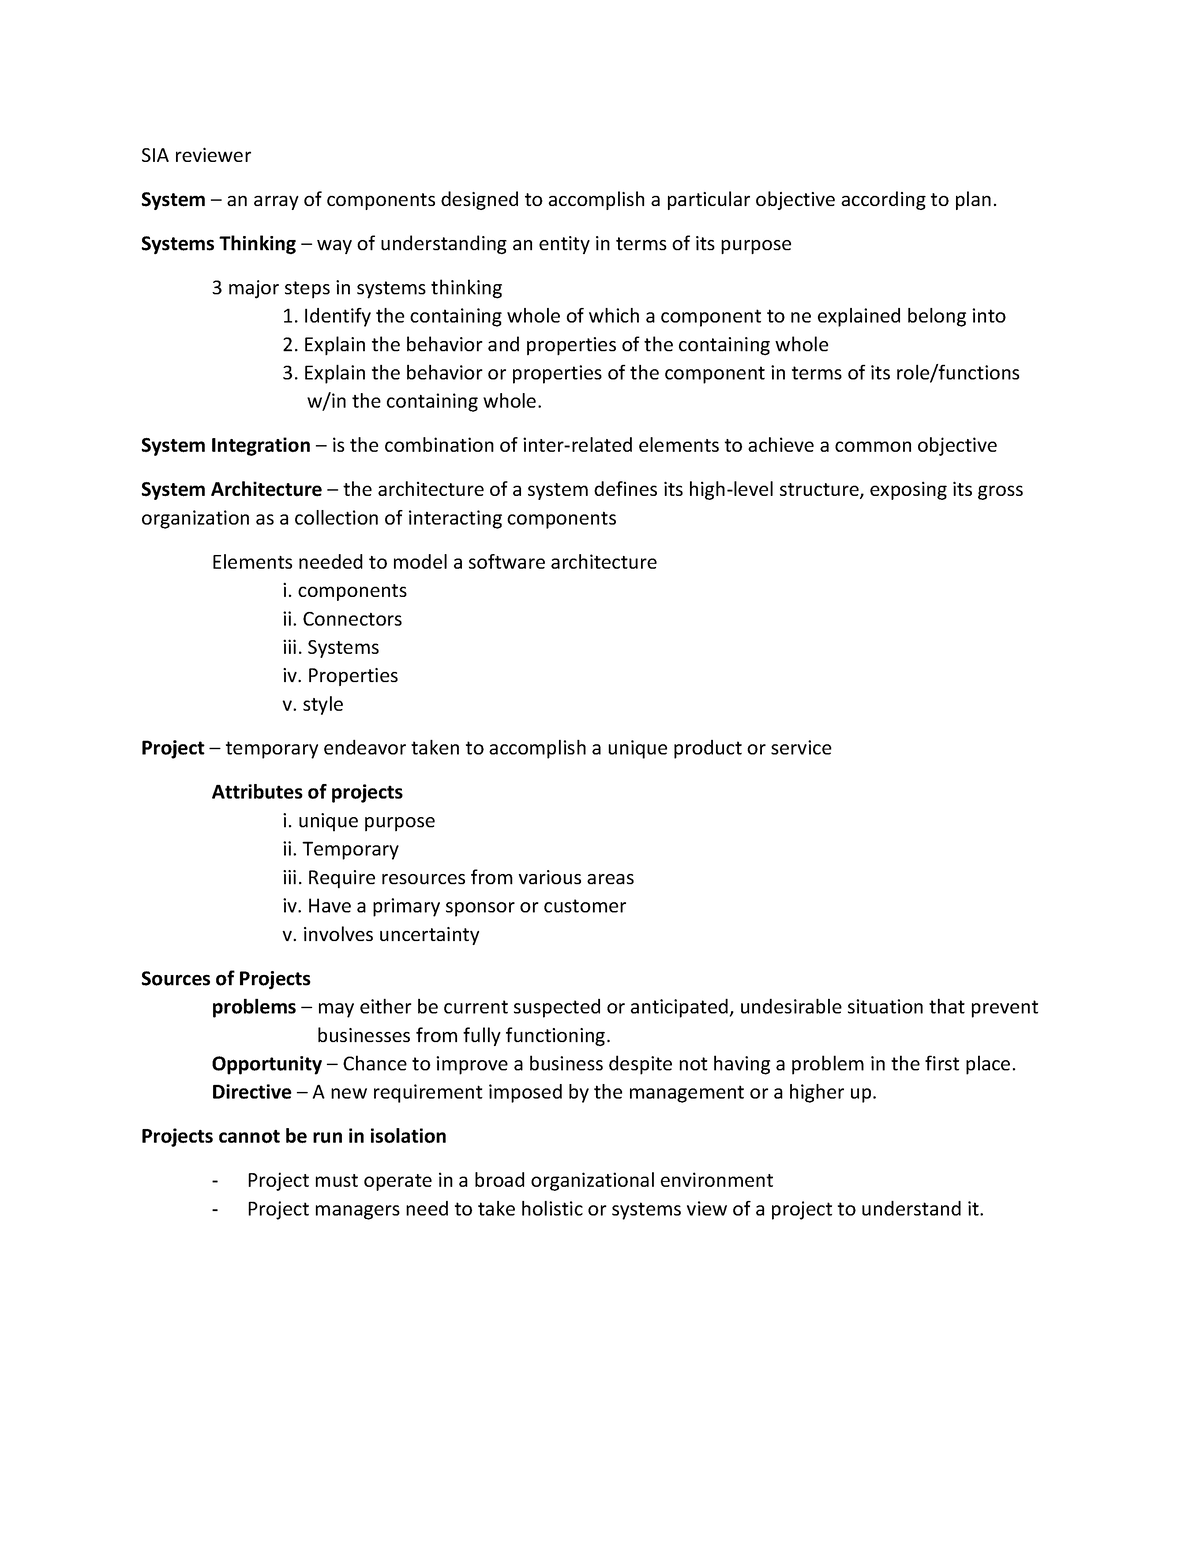 SIA-reviewer - CIA notes - SIA reviewer System – an array of components ...